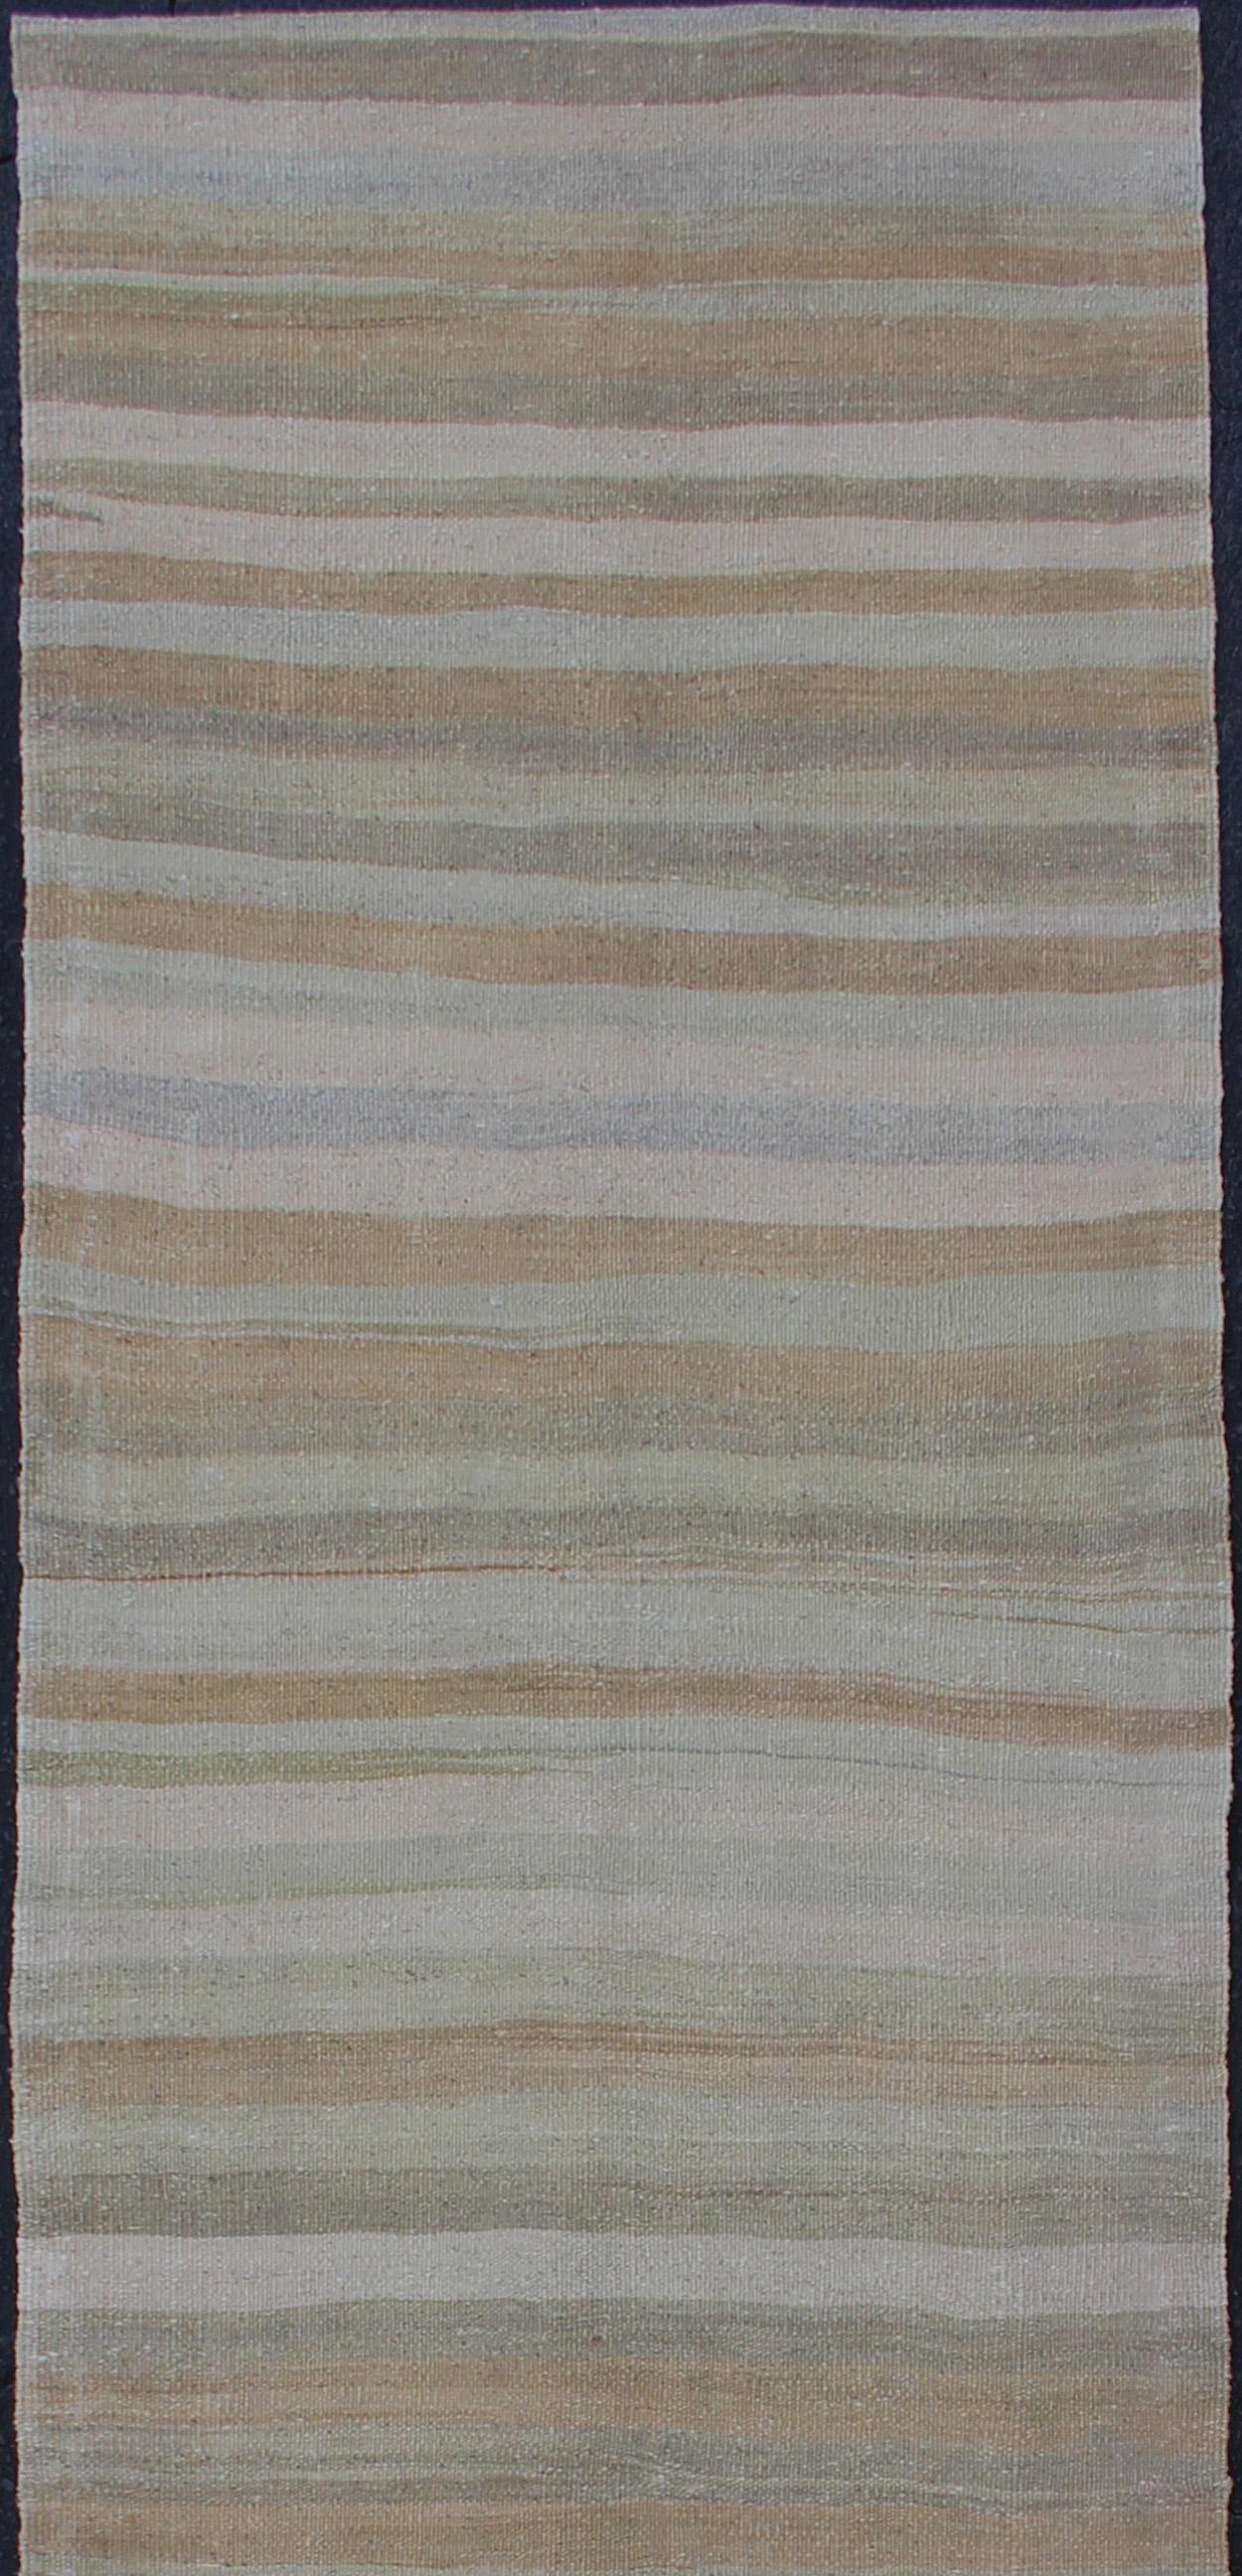 Vintage Kilim runner from Turkey with stripes, rug / EN-176326, country of origin / type: Turkey / Kilim, circa 1960

Measures: 2'5 x 10'8 

This softly striped-design vintage runner from Turkey features a modern look, rendered in taupe, gray,